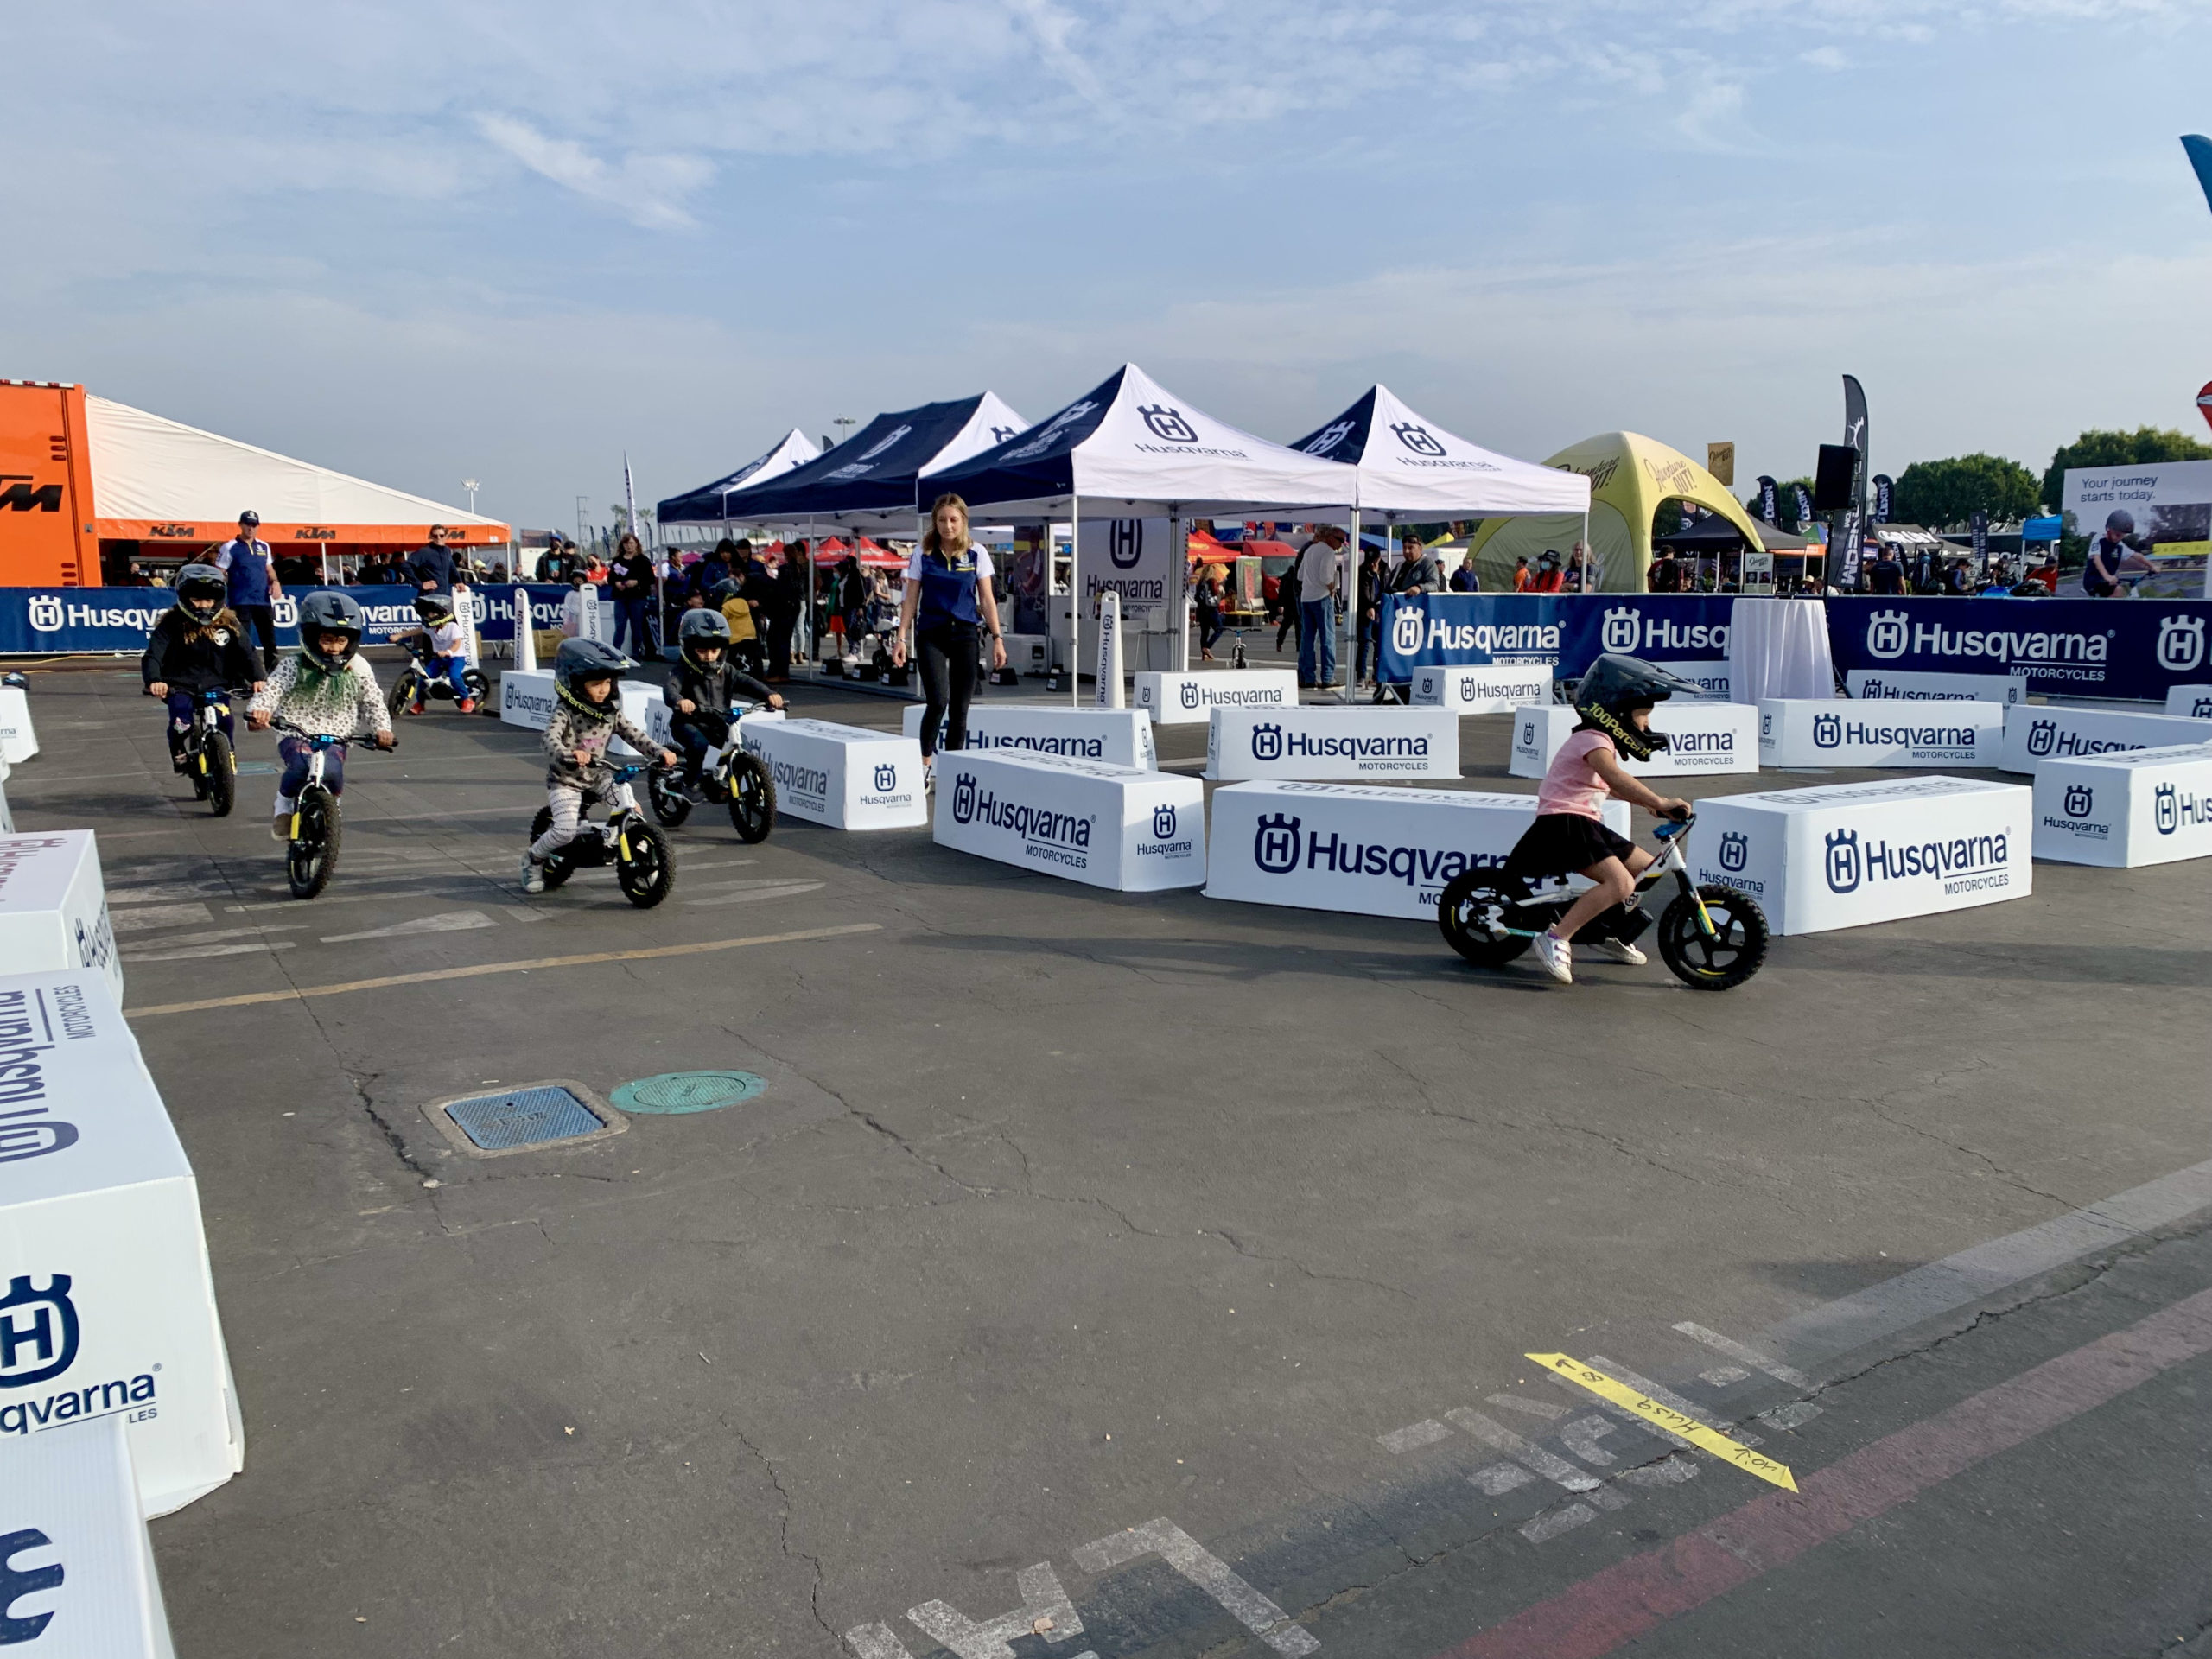 Husqvarna obstacle course at IMS 2021